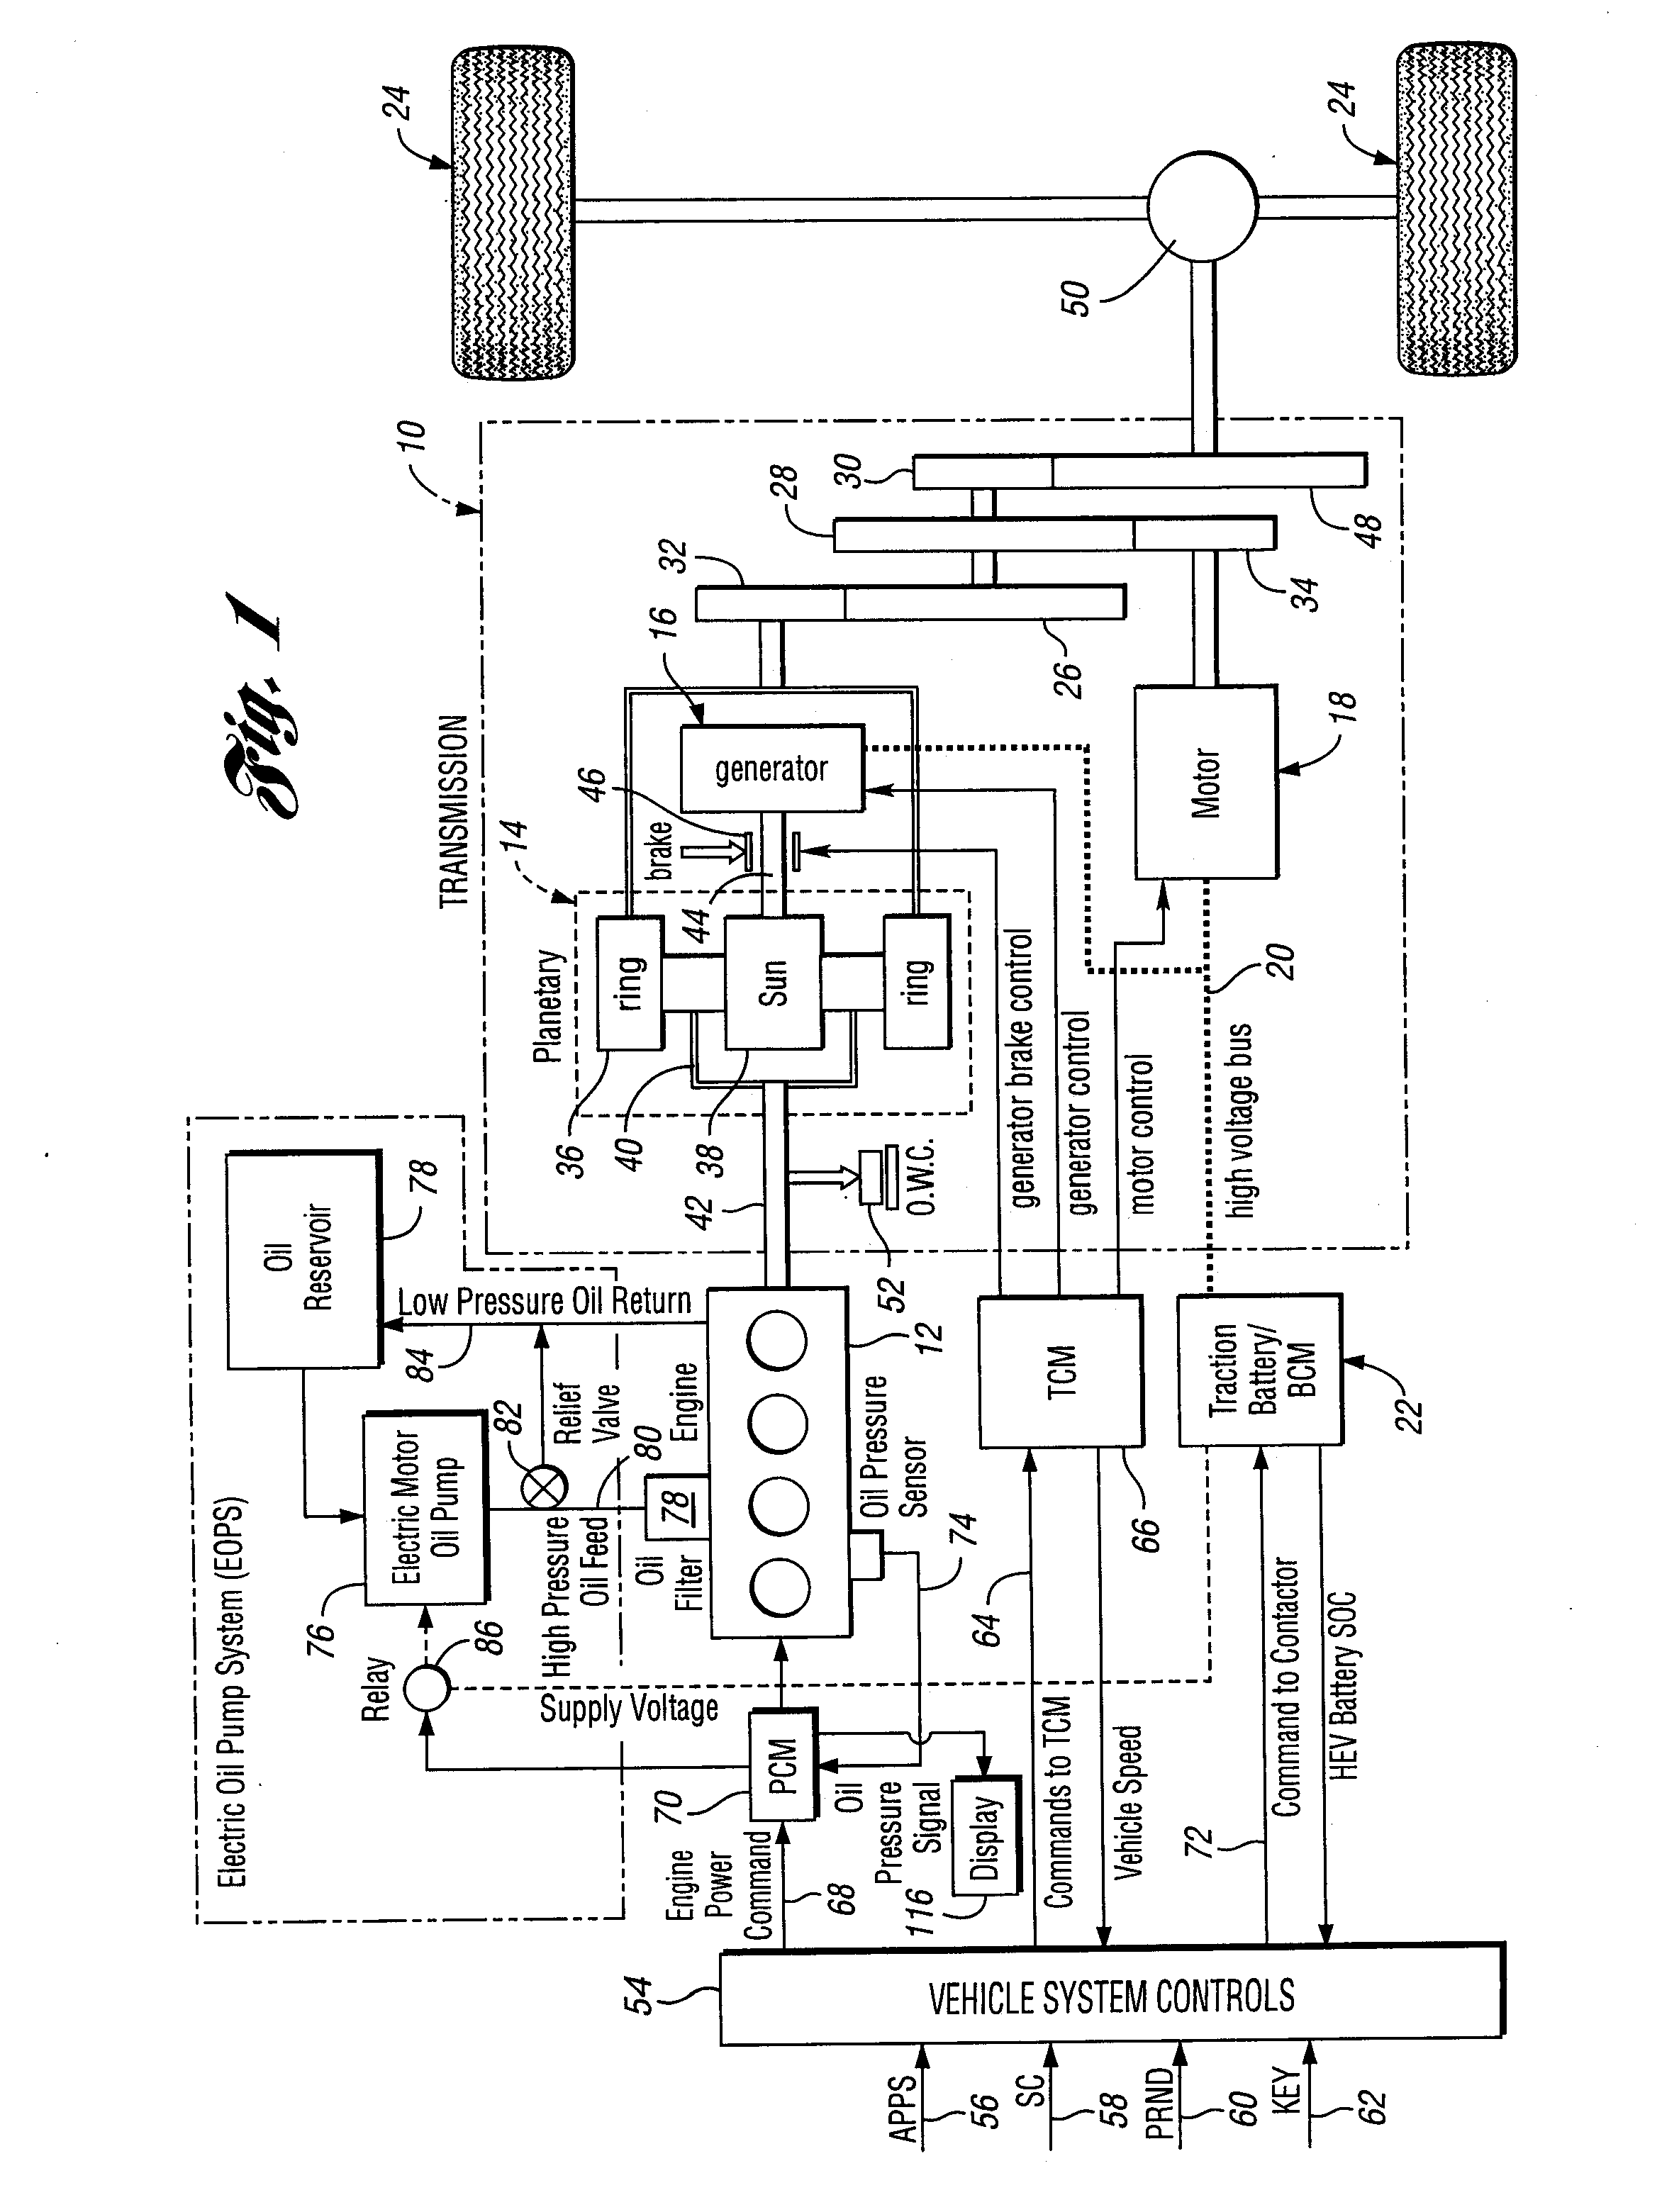 Electric Oil Pump System and Controls for Hybrid Electric Vehicles